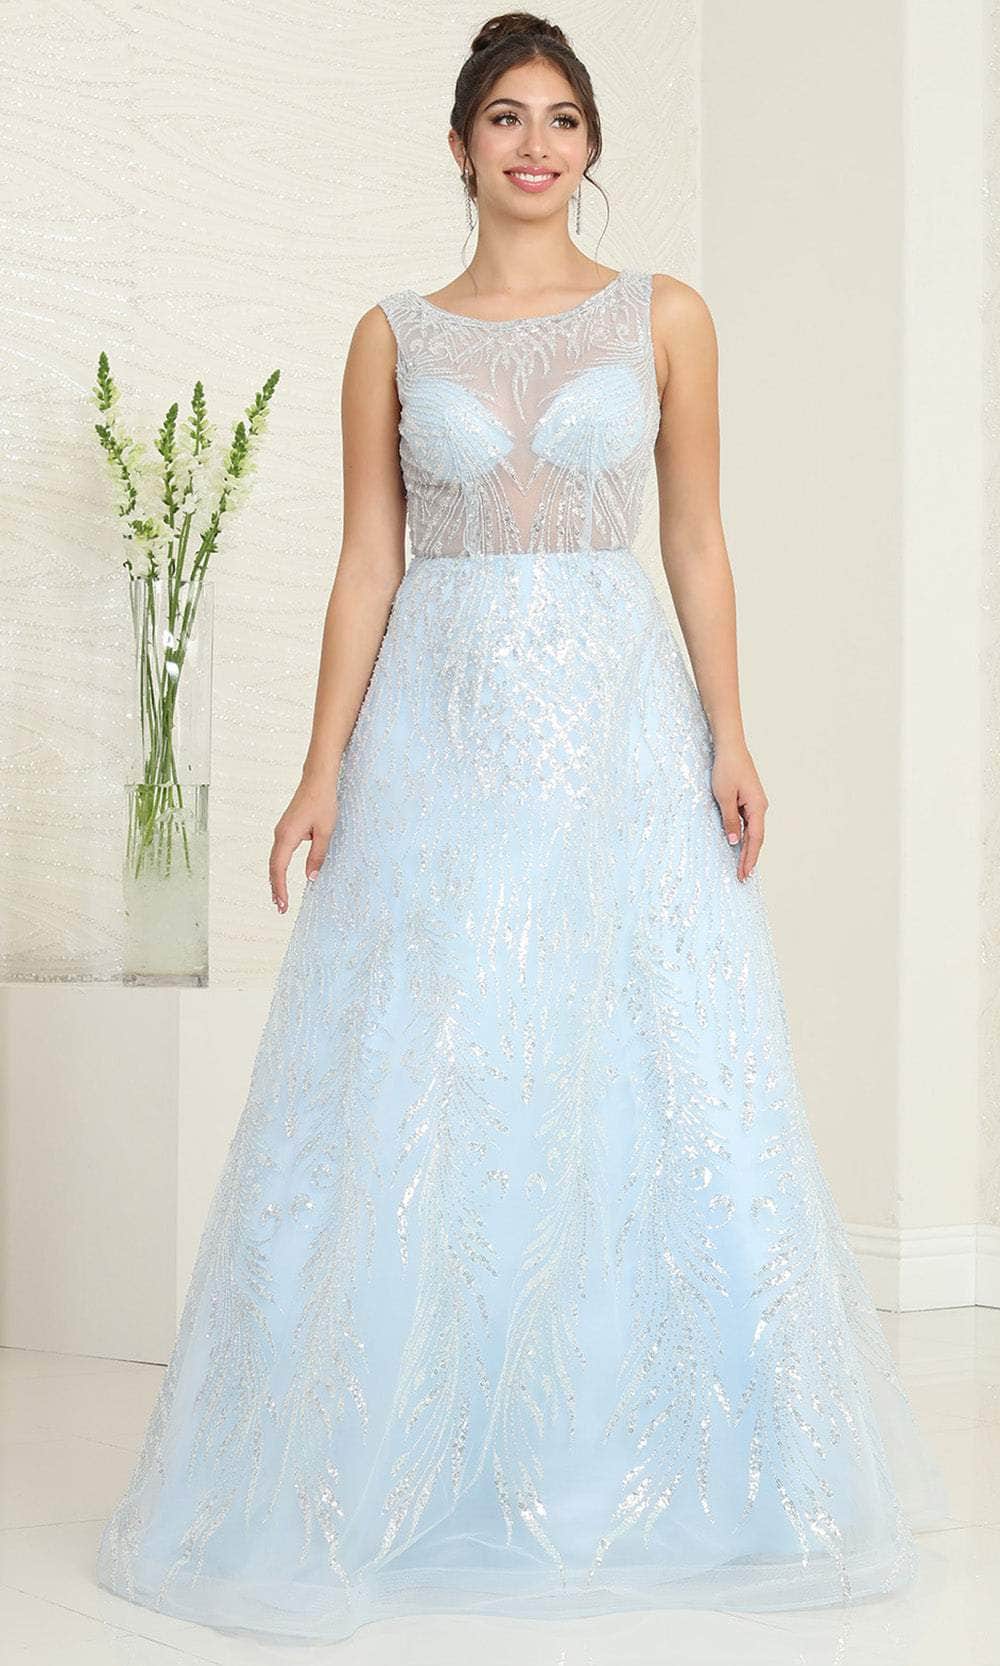 May Queen RQ8081 - Sequin A-Line Prom Gown Evening Dresses 4 / Babyblue